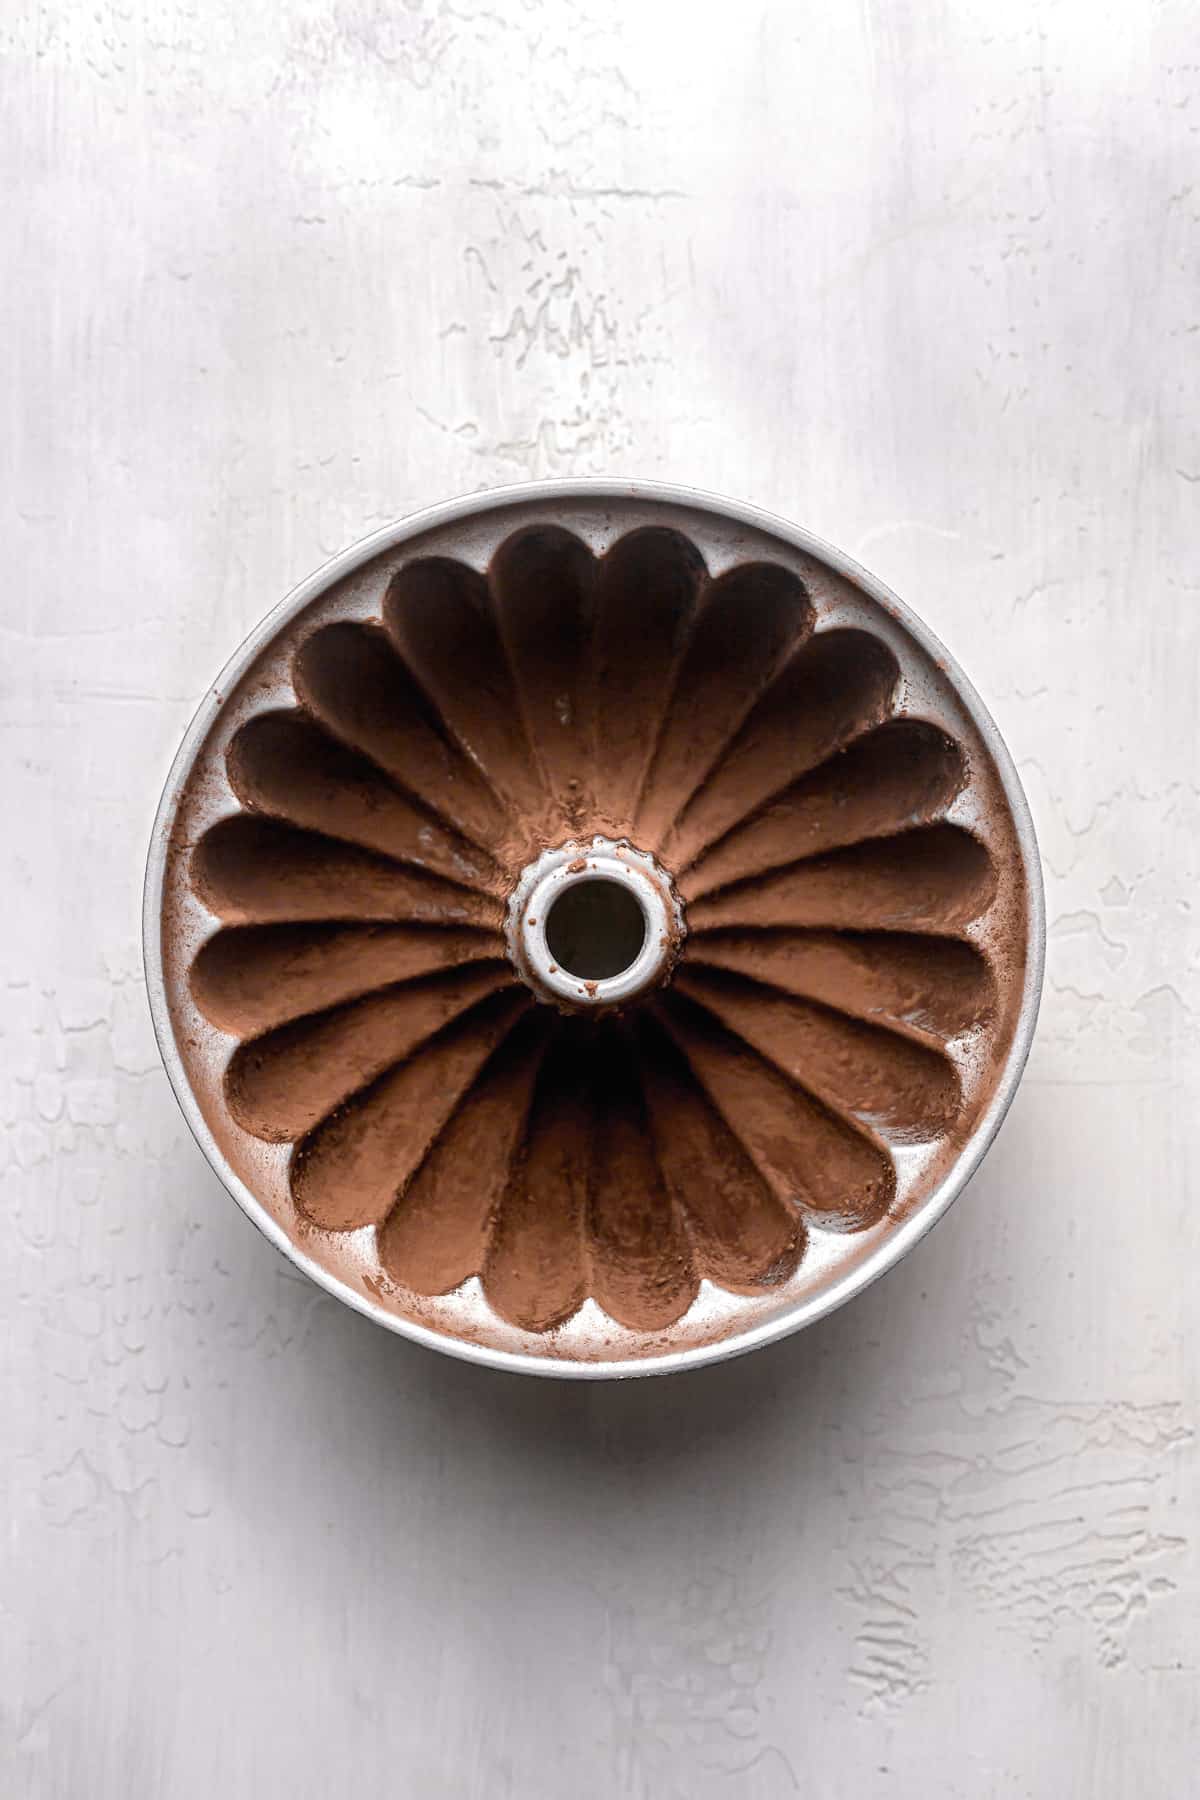 bundt pan coated with cocoa powder.